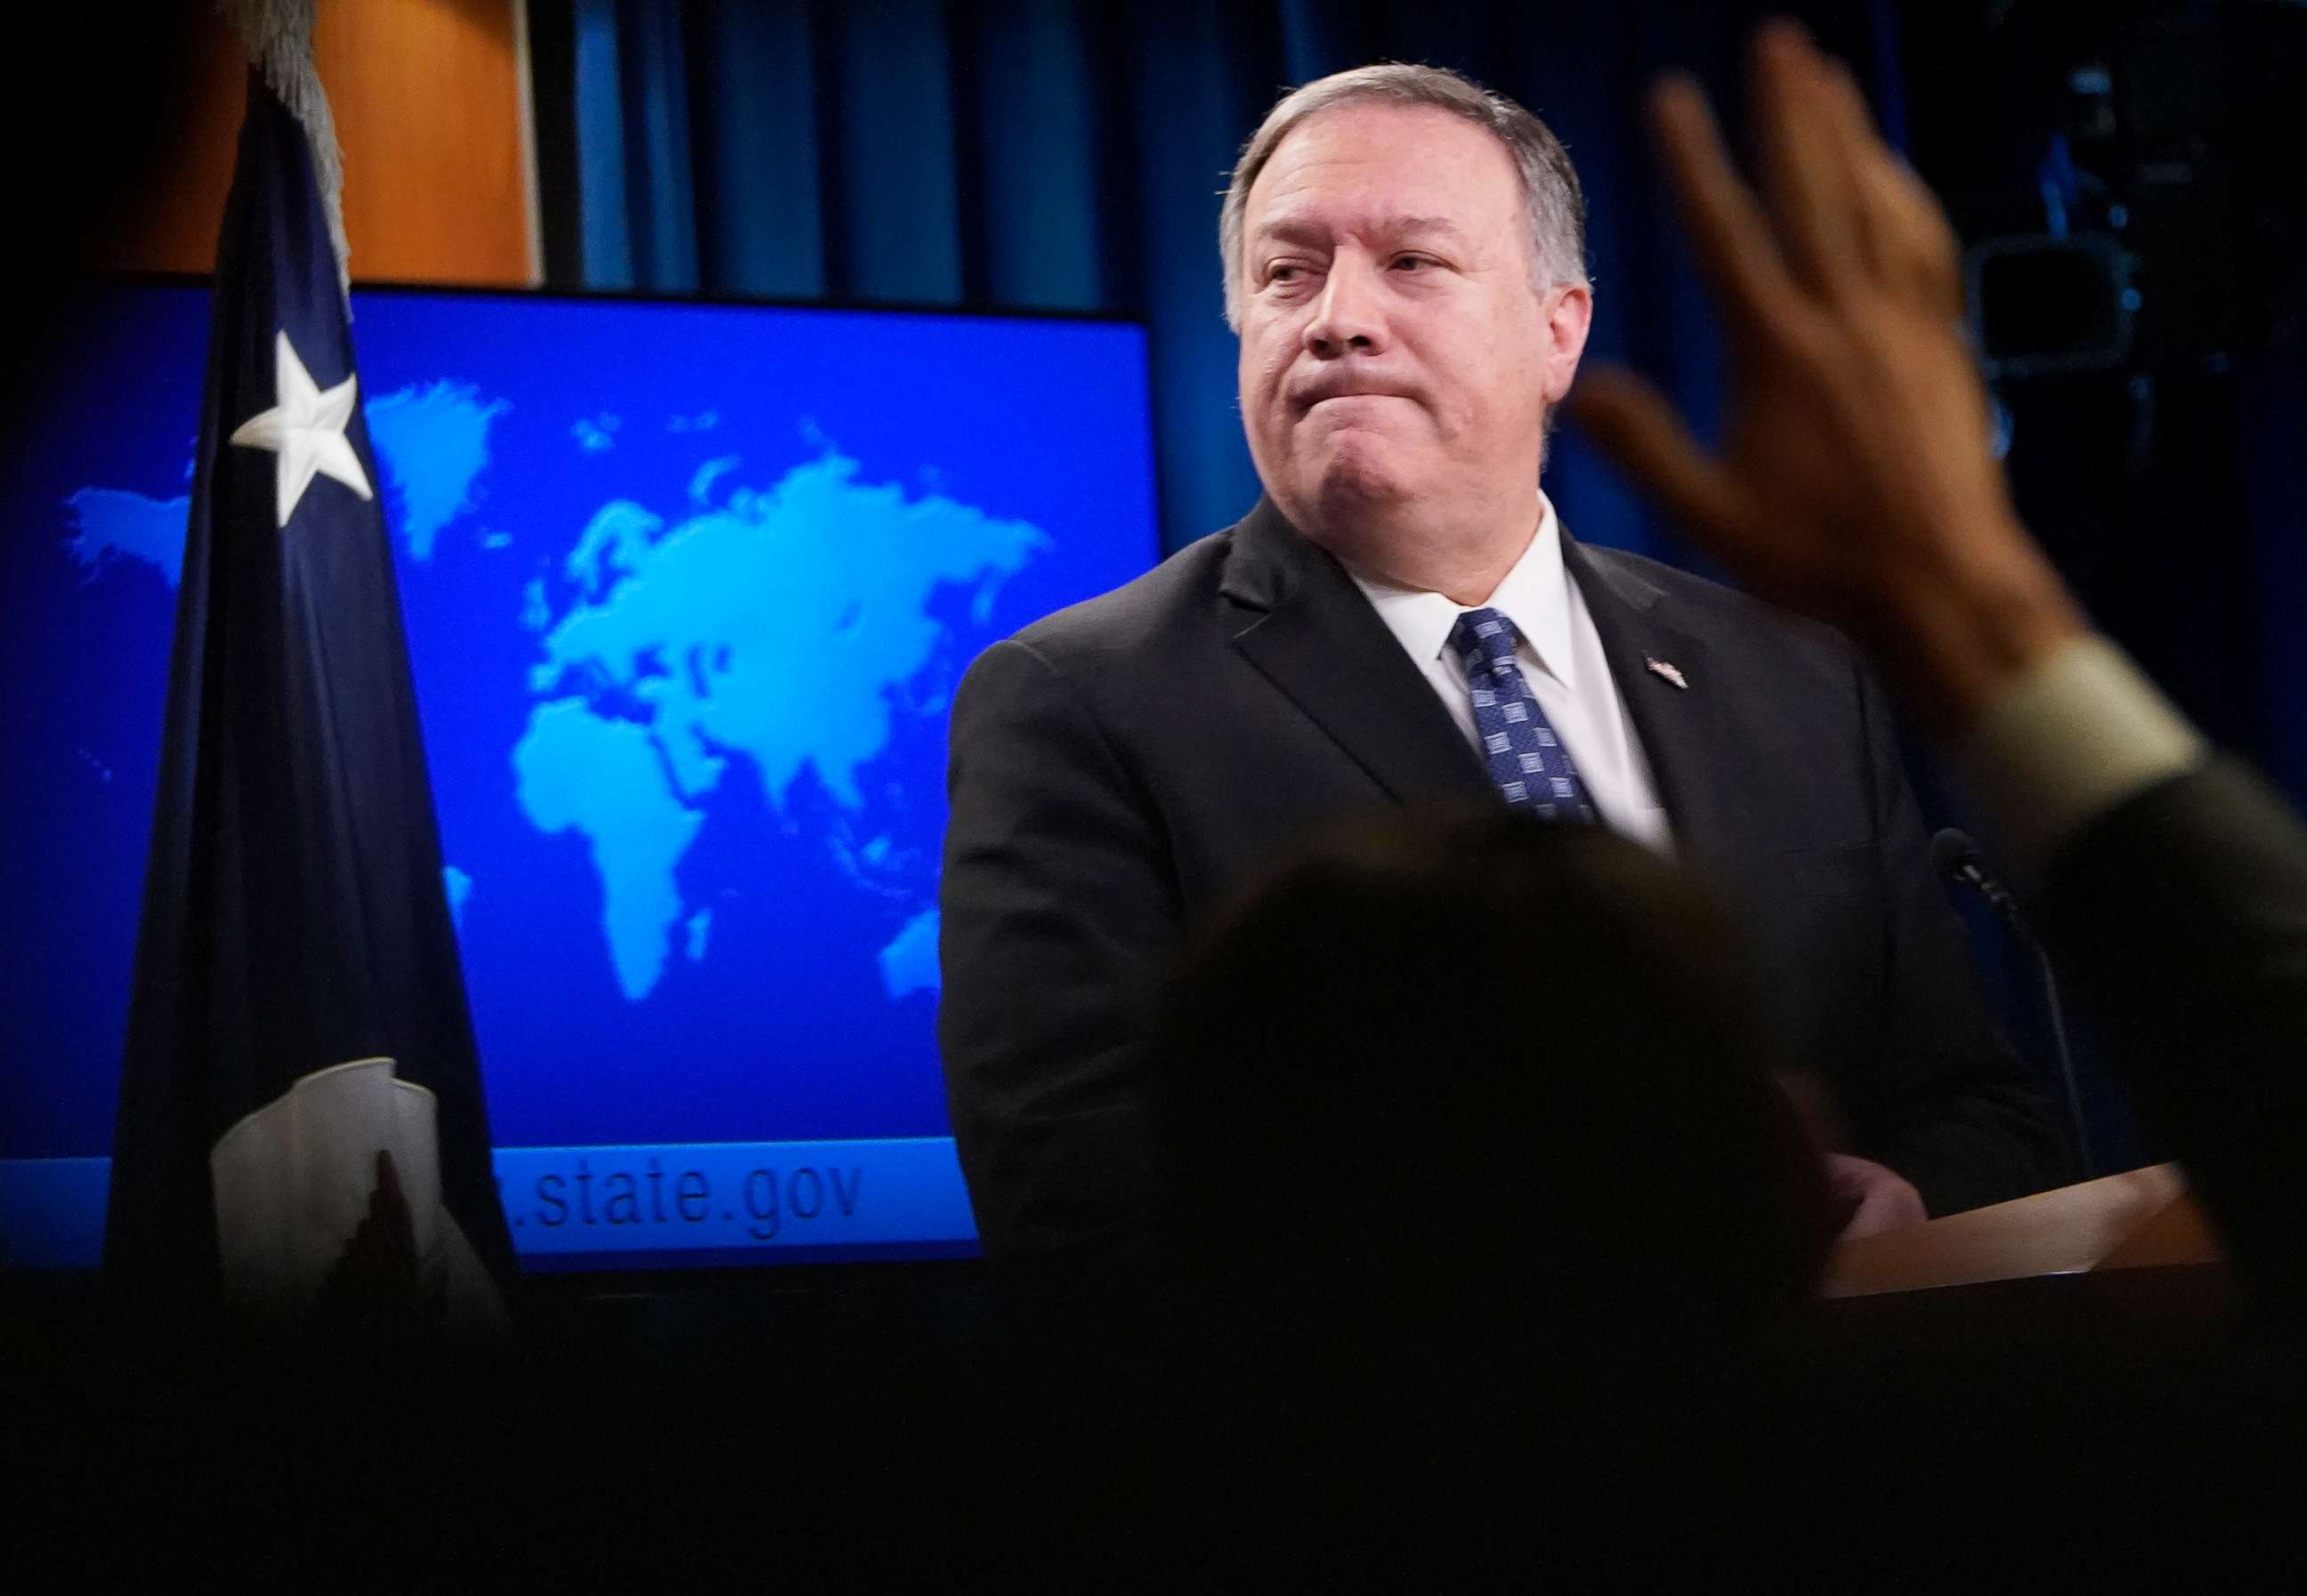 PHOTO: Secretary of State Mike Pompeo speaks at the State Department, Jan. 7, 2020, in Washington, D.C.